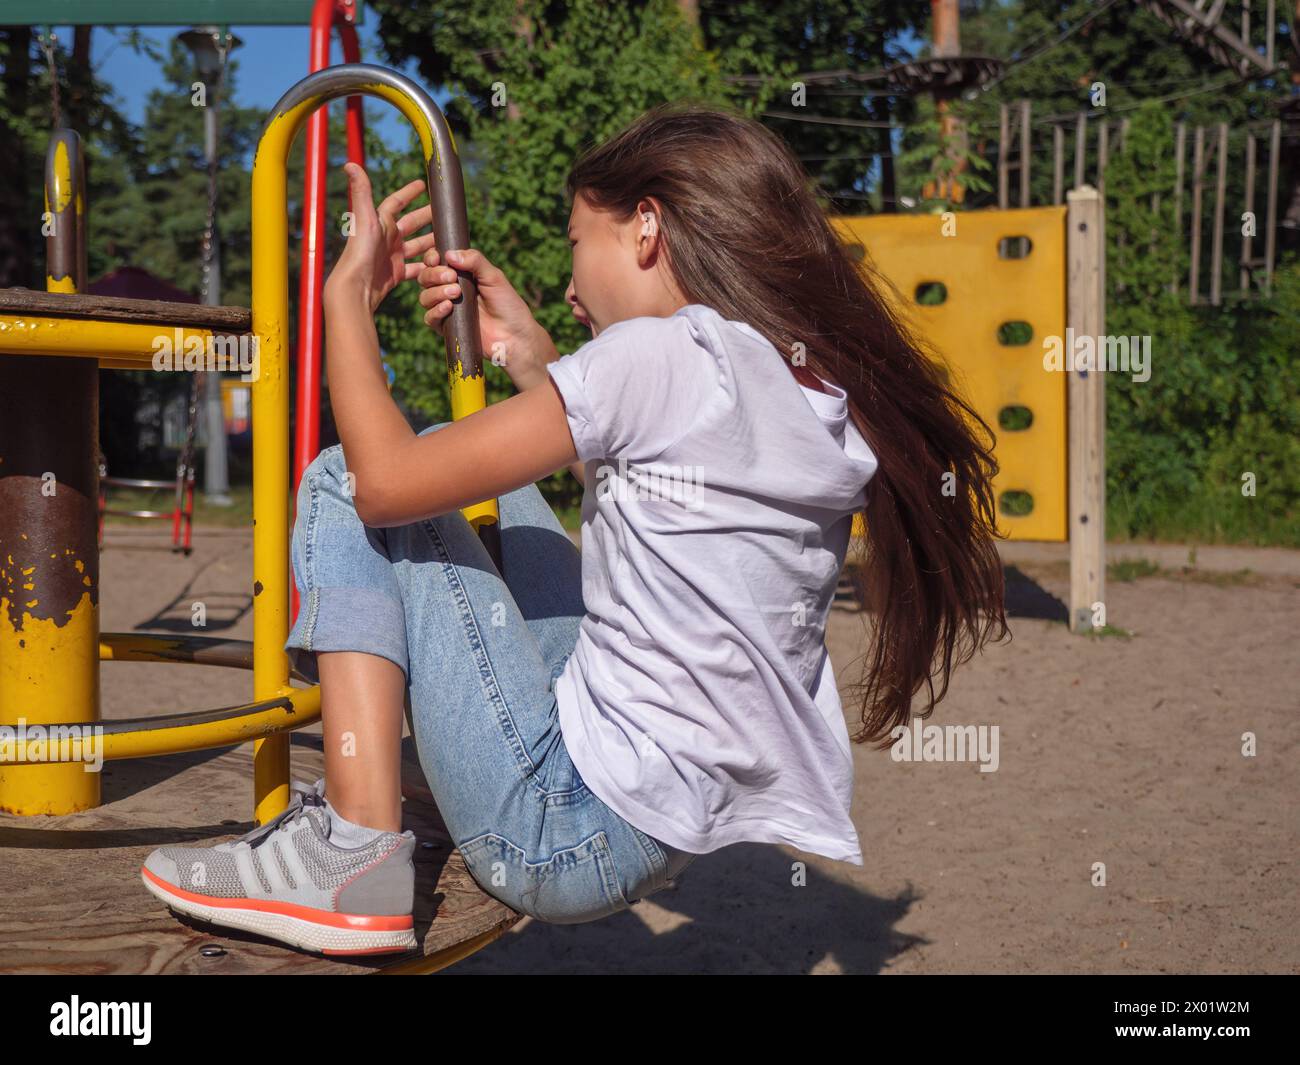 Closeup of a happy smiling teenage girl with long hair in a white t-shirt and blue jeans spinning at a merry-go-round at children playground Stock Photo